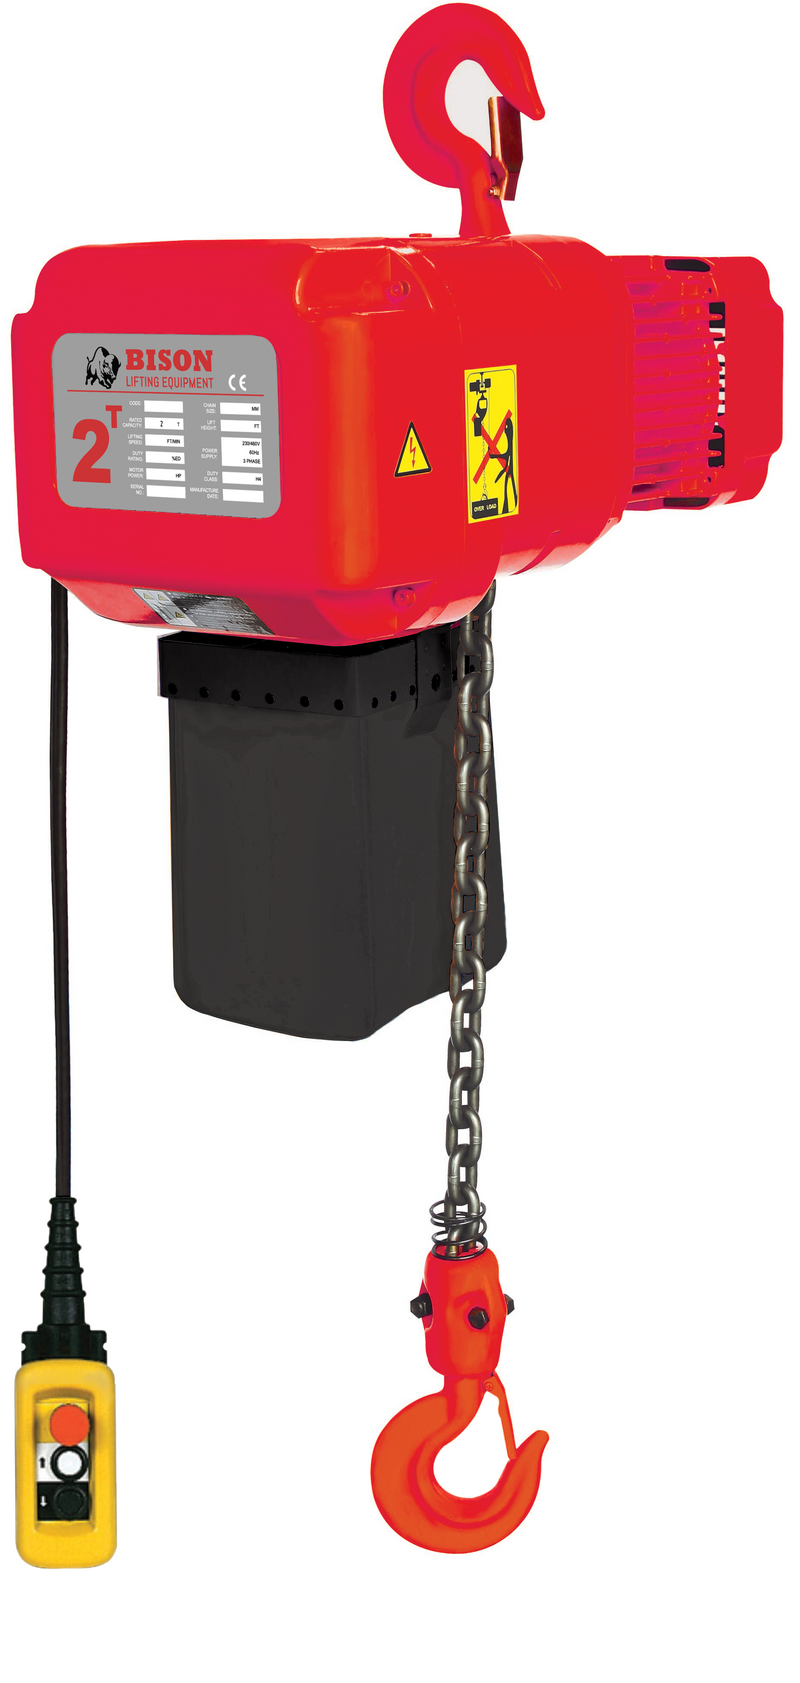 2 ton Electric Chain Hoist - Bison Lifting - Single Speed, Three Phase, 20' Lift